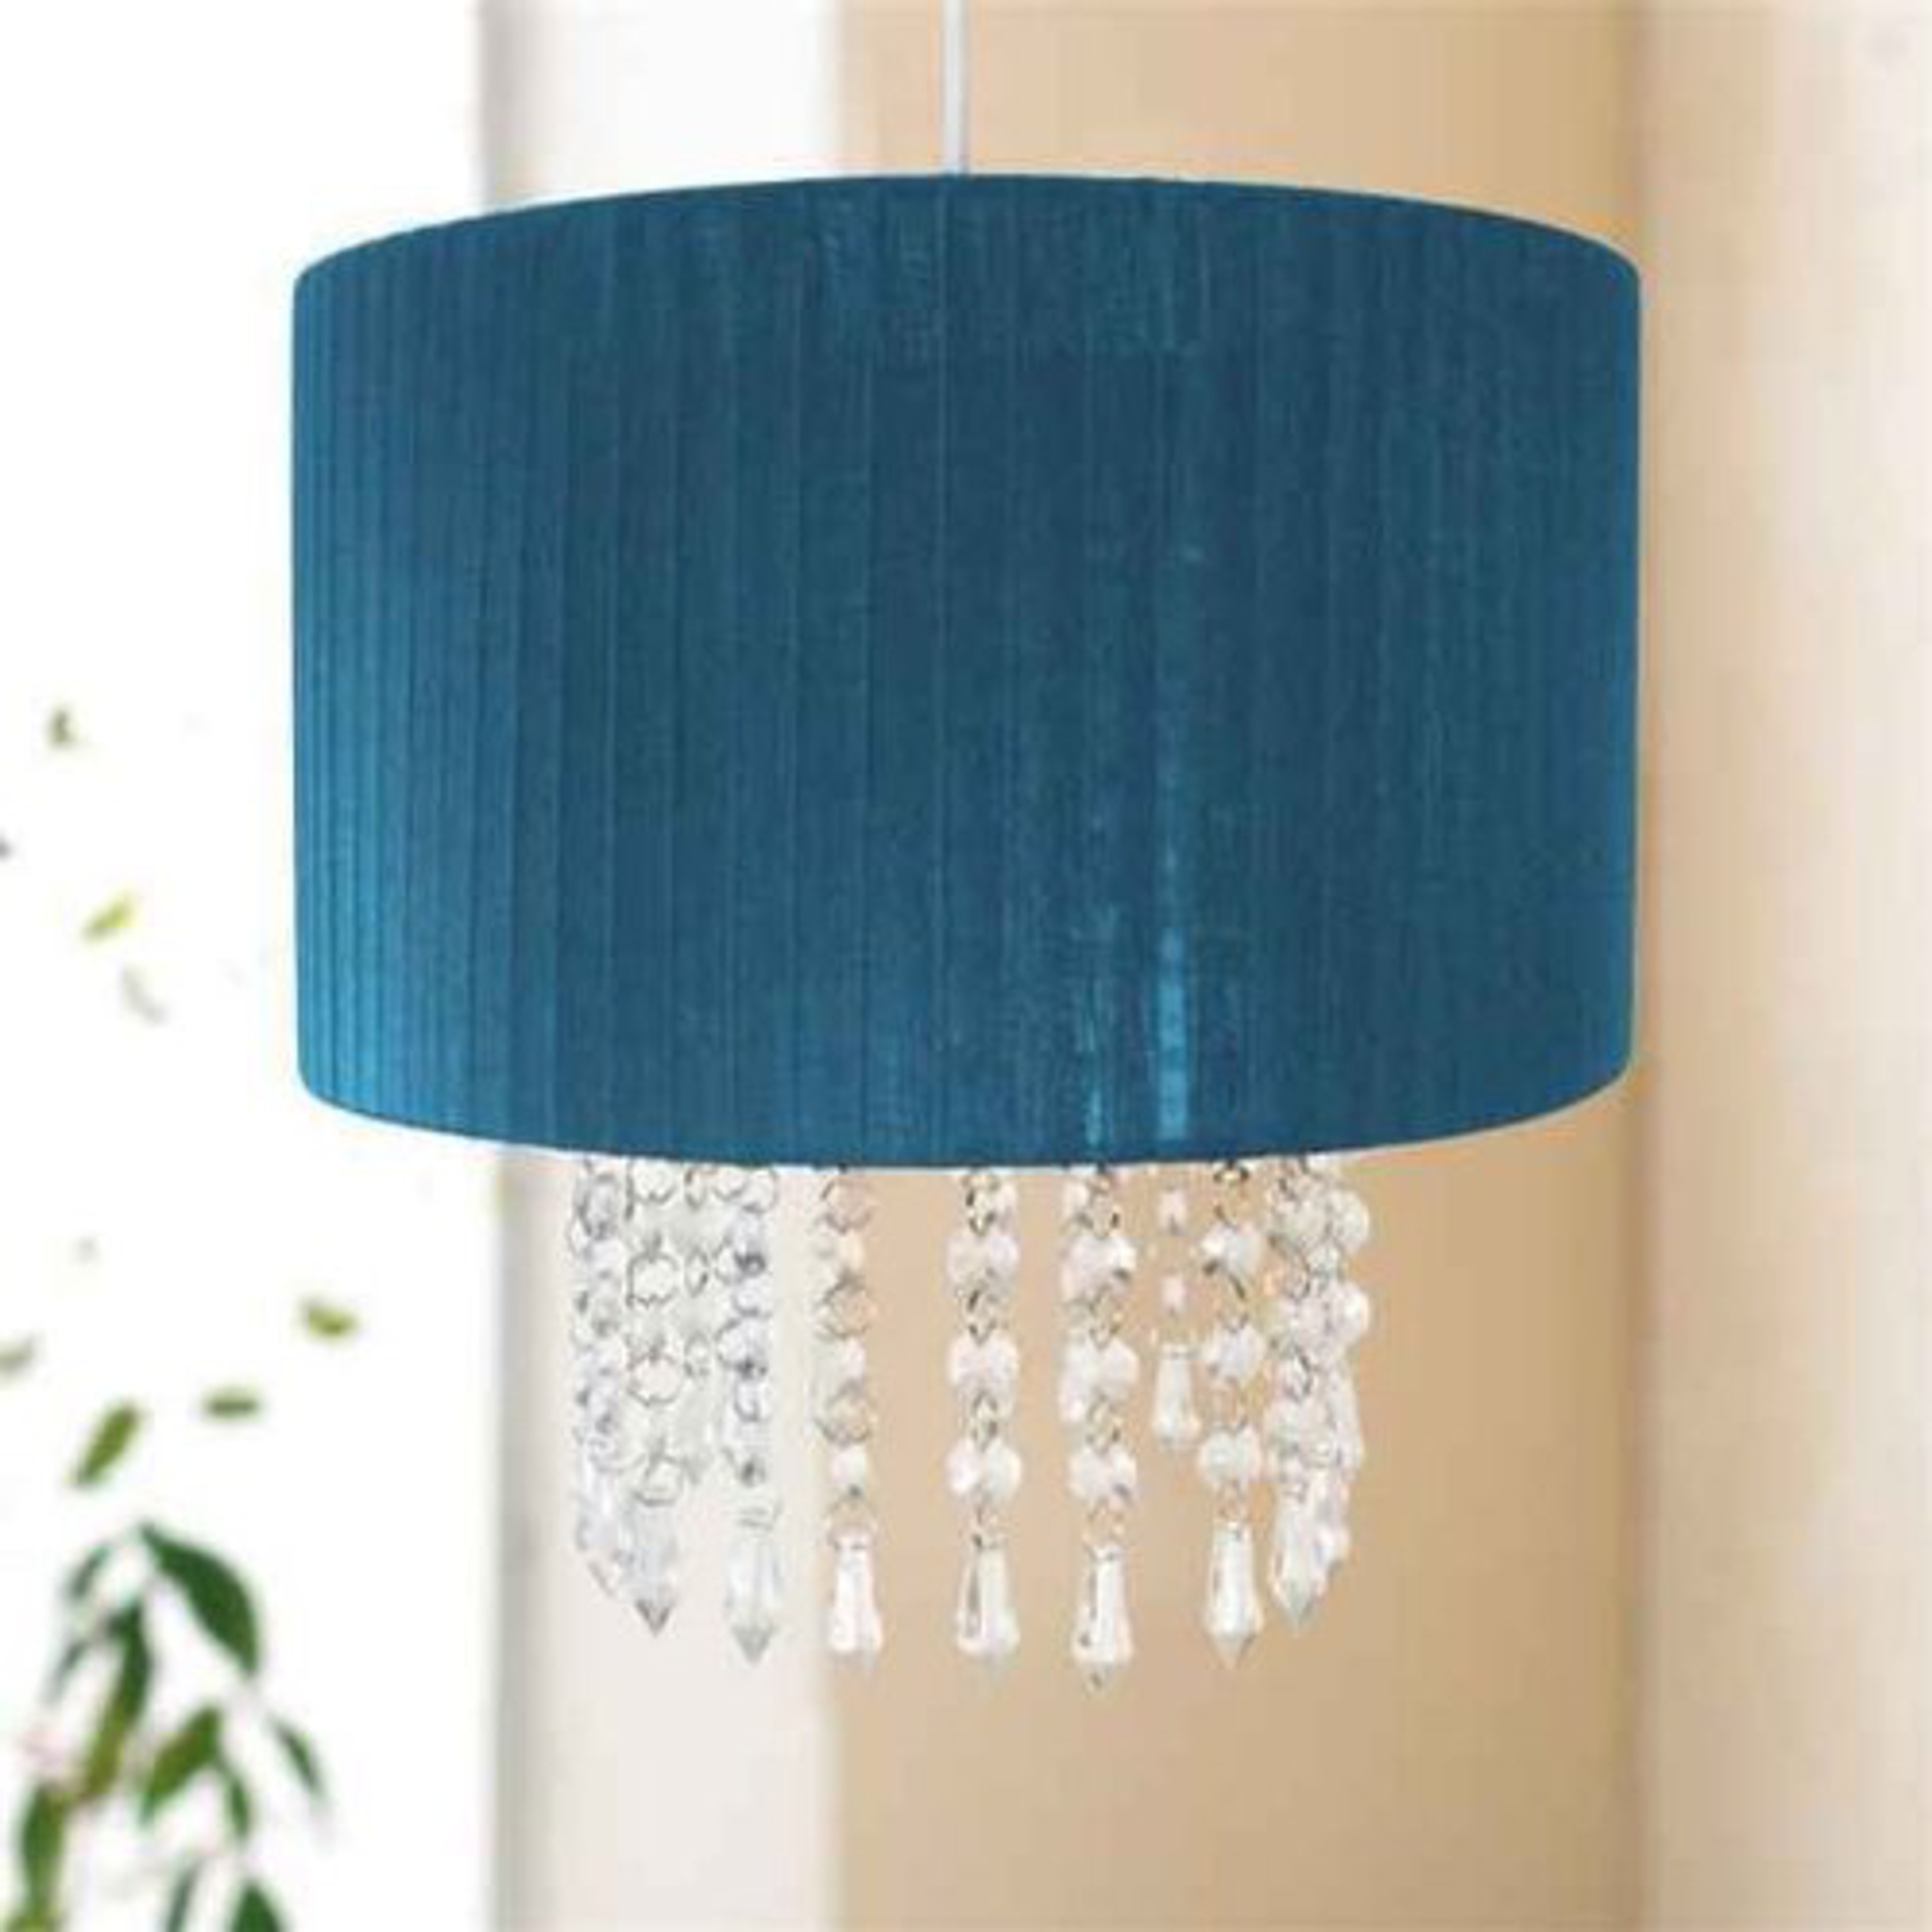 Easy Fit Chandelier 'Teal' Hanging Crystals 30cm Pendant Shade Lighting